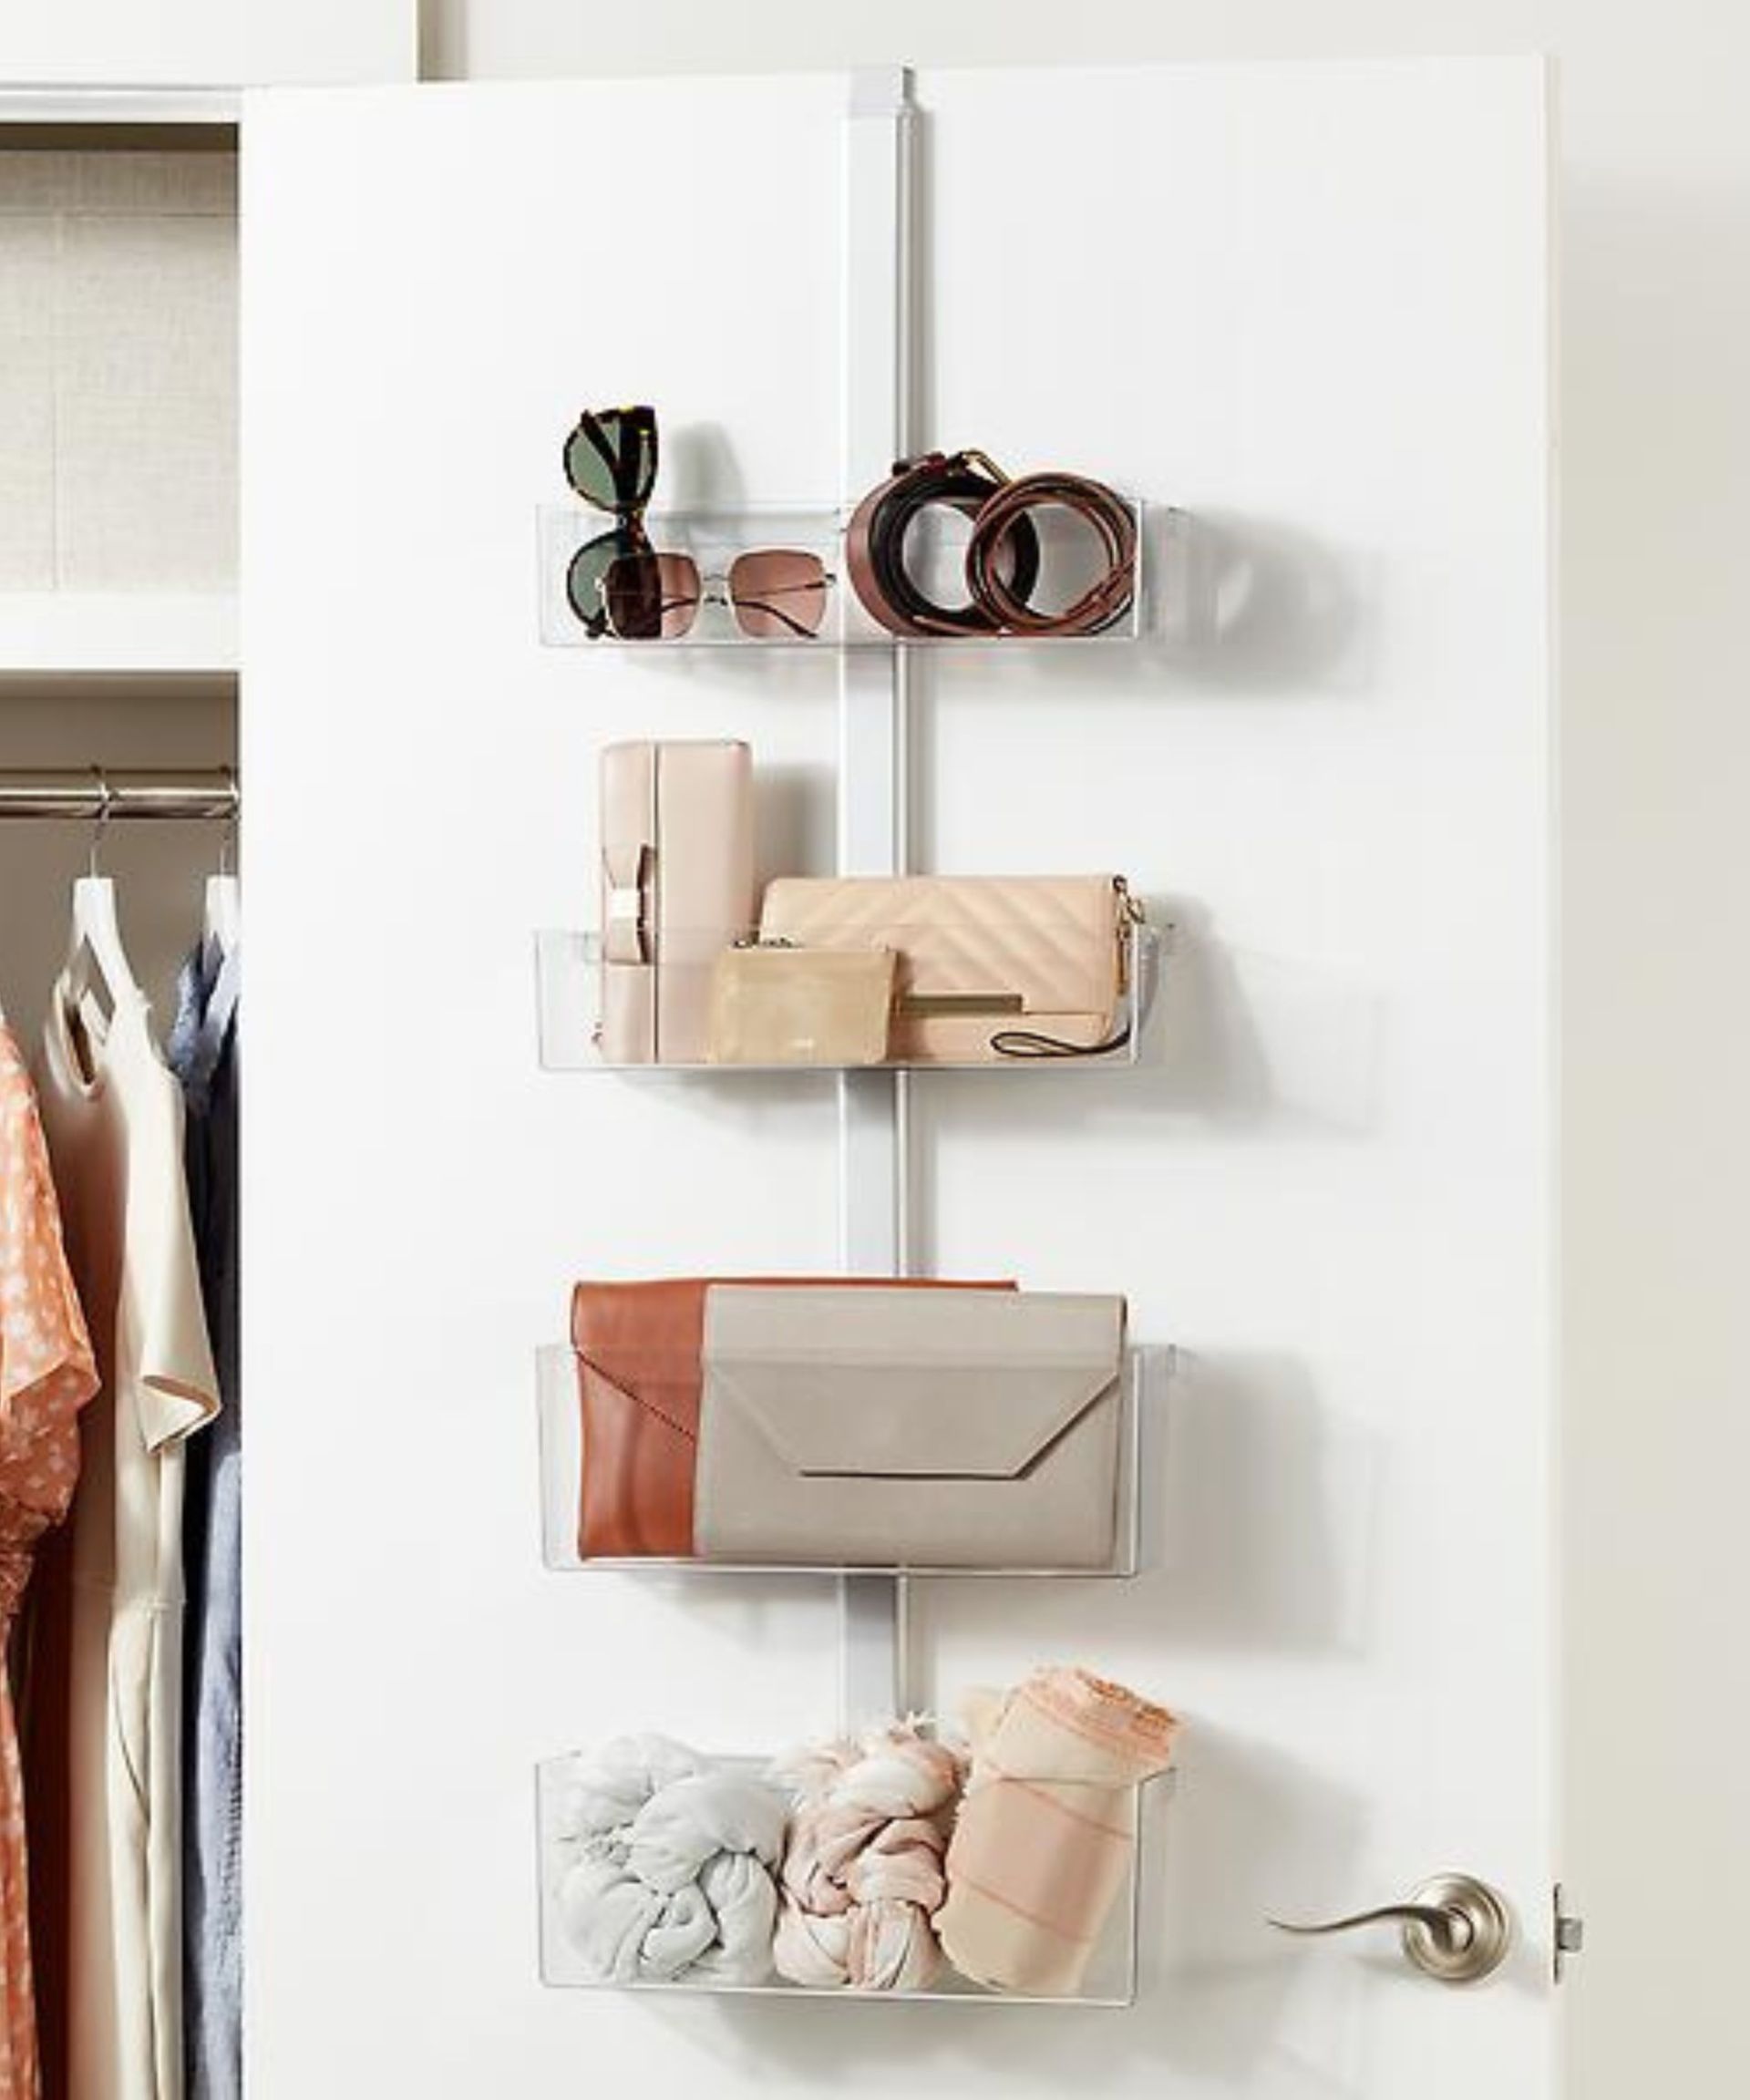 <p>                     Over-the-door organizers are one of the best space-saving options for small space storage on the market, and with many of them offering full customization, they are perfect for storing a purse collection that has a variety of shaped and sized options.                    </p>                                      <p>                     Consider a door organizer with baskets to stand your purses up, or add hooks to hang smaller lightweight purses in groups.                    </p>